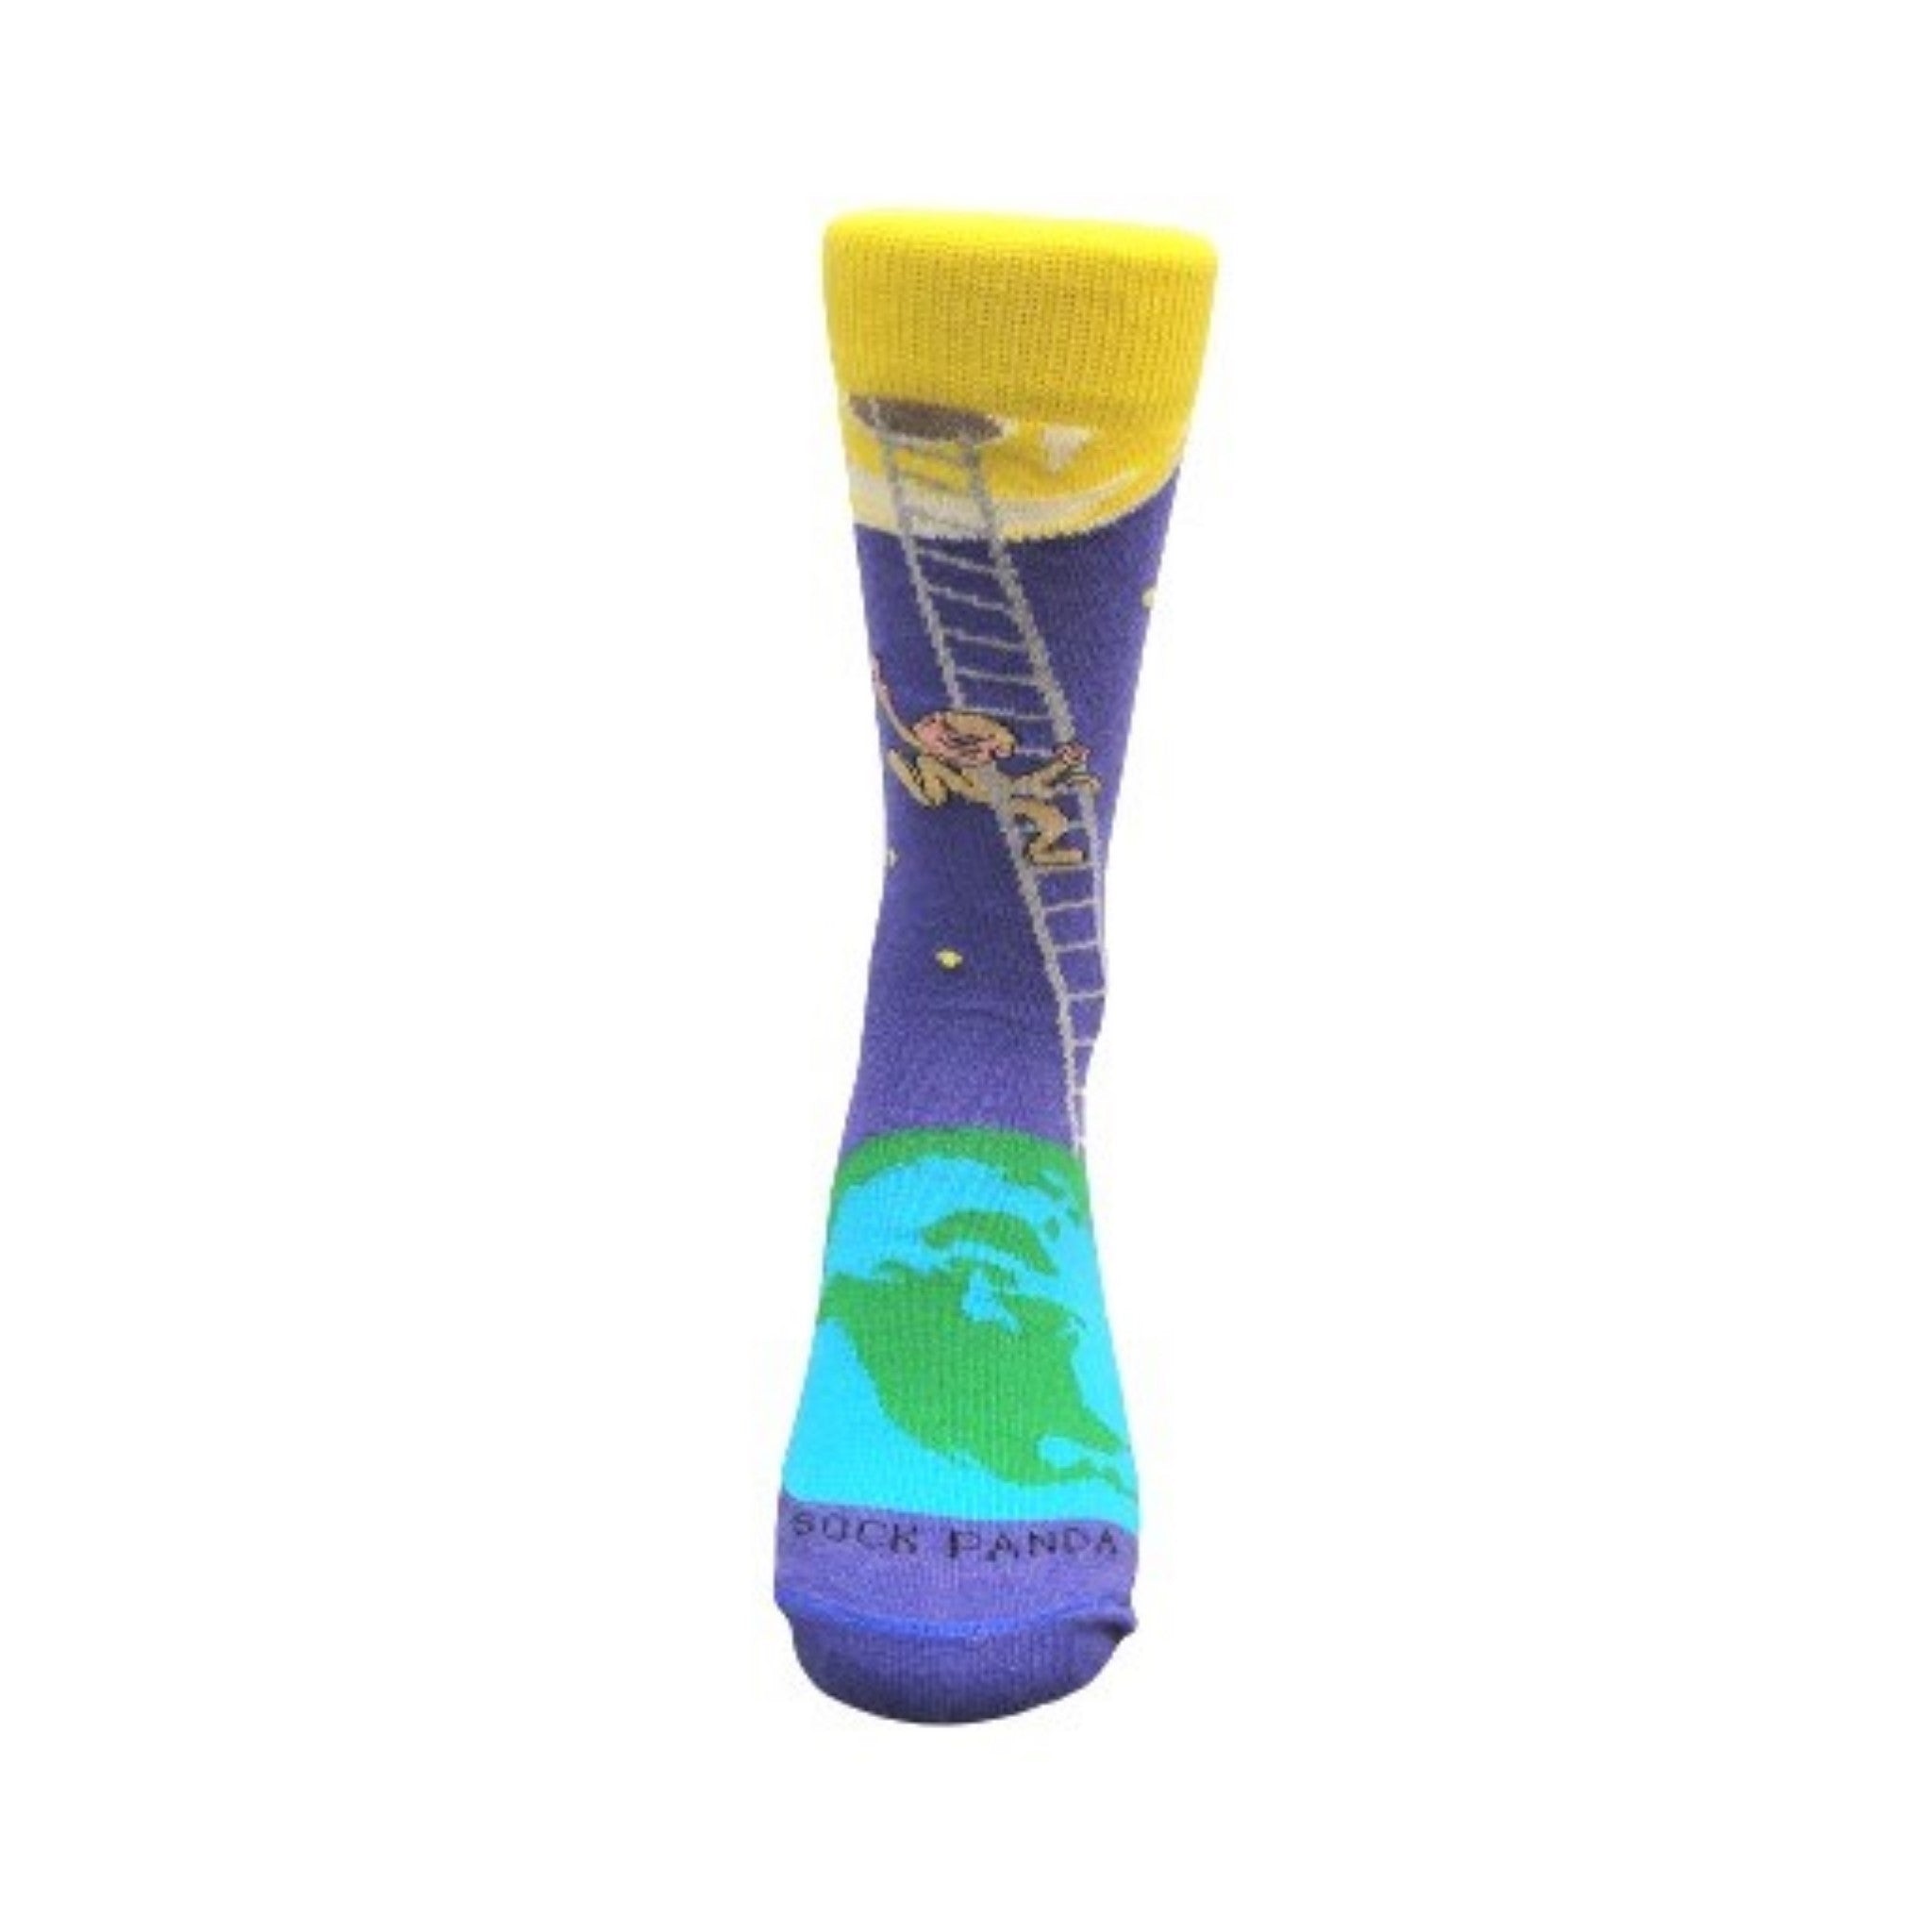 It is Good to Dream - Monkey Climbing Ladder to the Moon Socks from the Sock Panda (Adult Small)